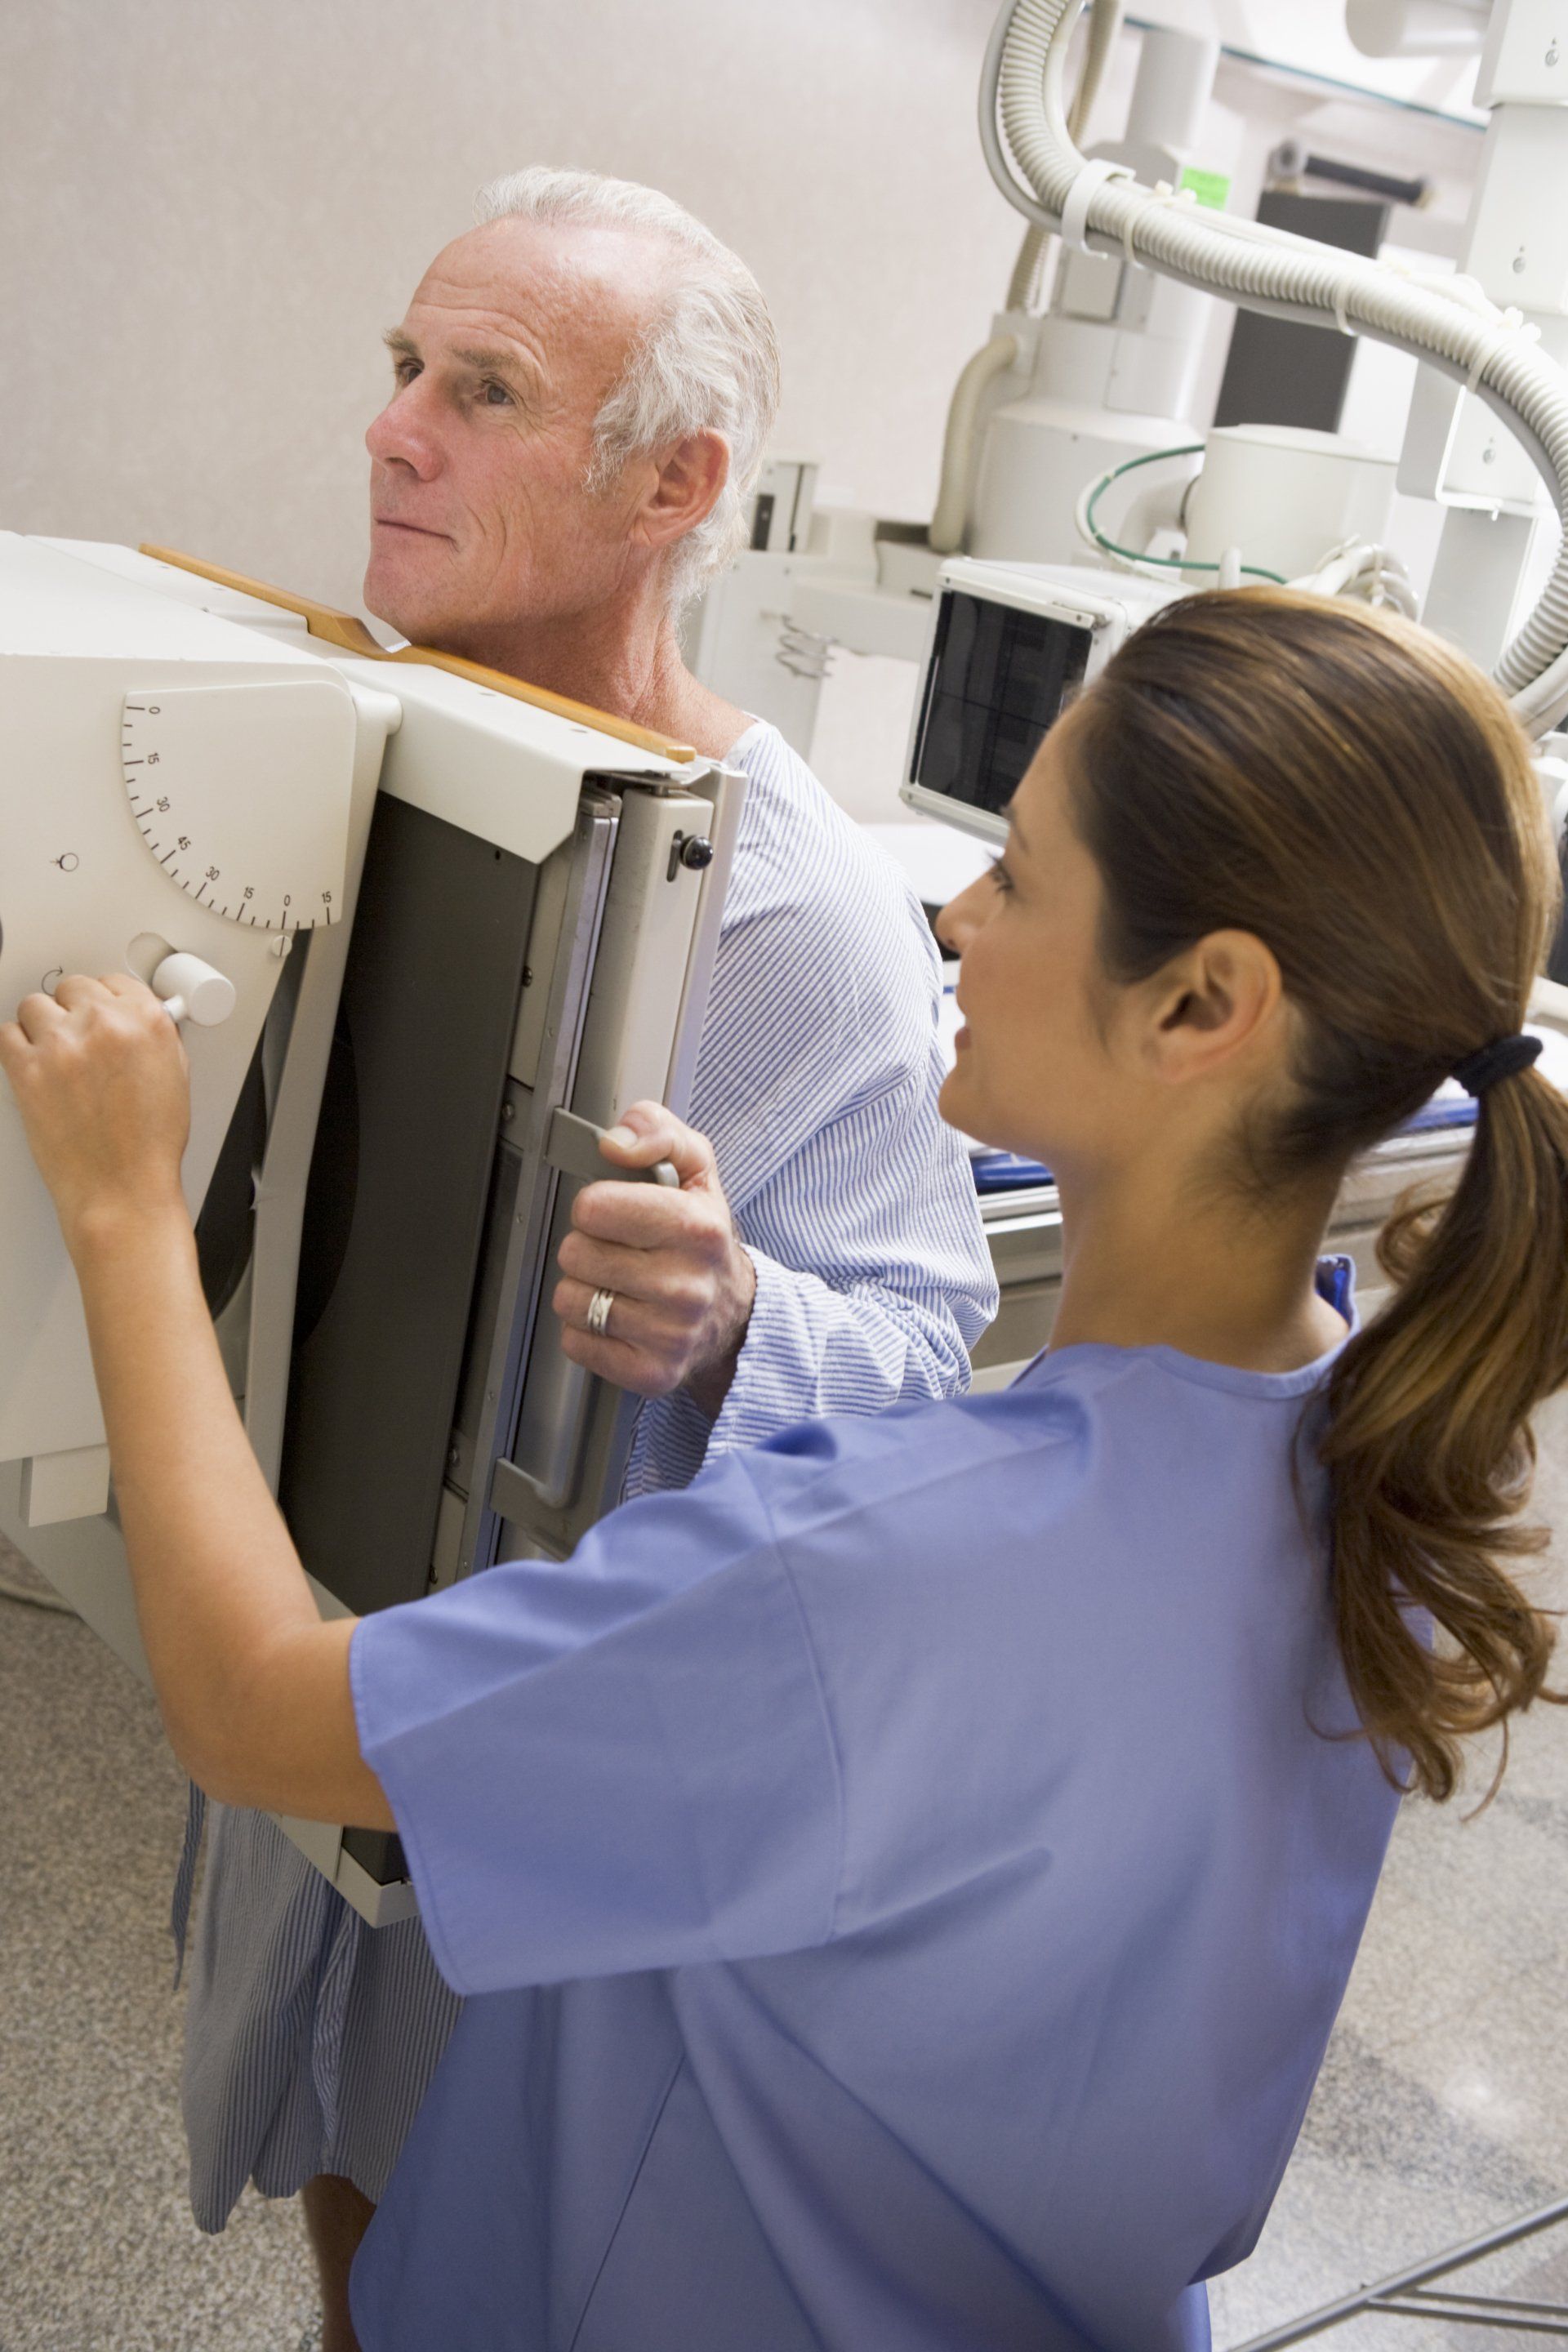 X ray Technology Programs—Nurse With Patient Having An X-Ray in Nashville,TN